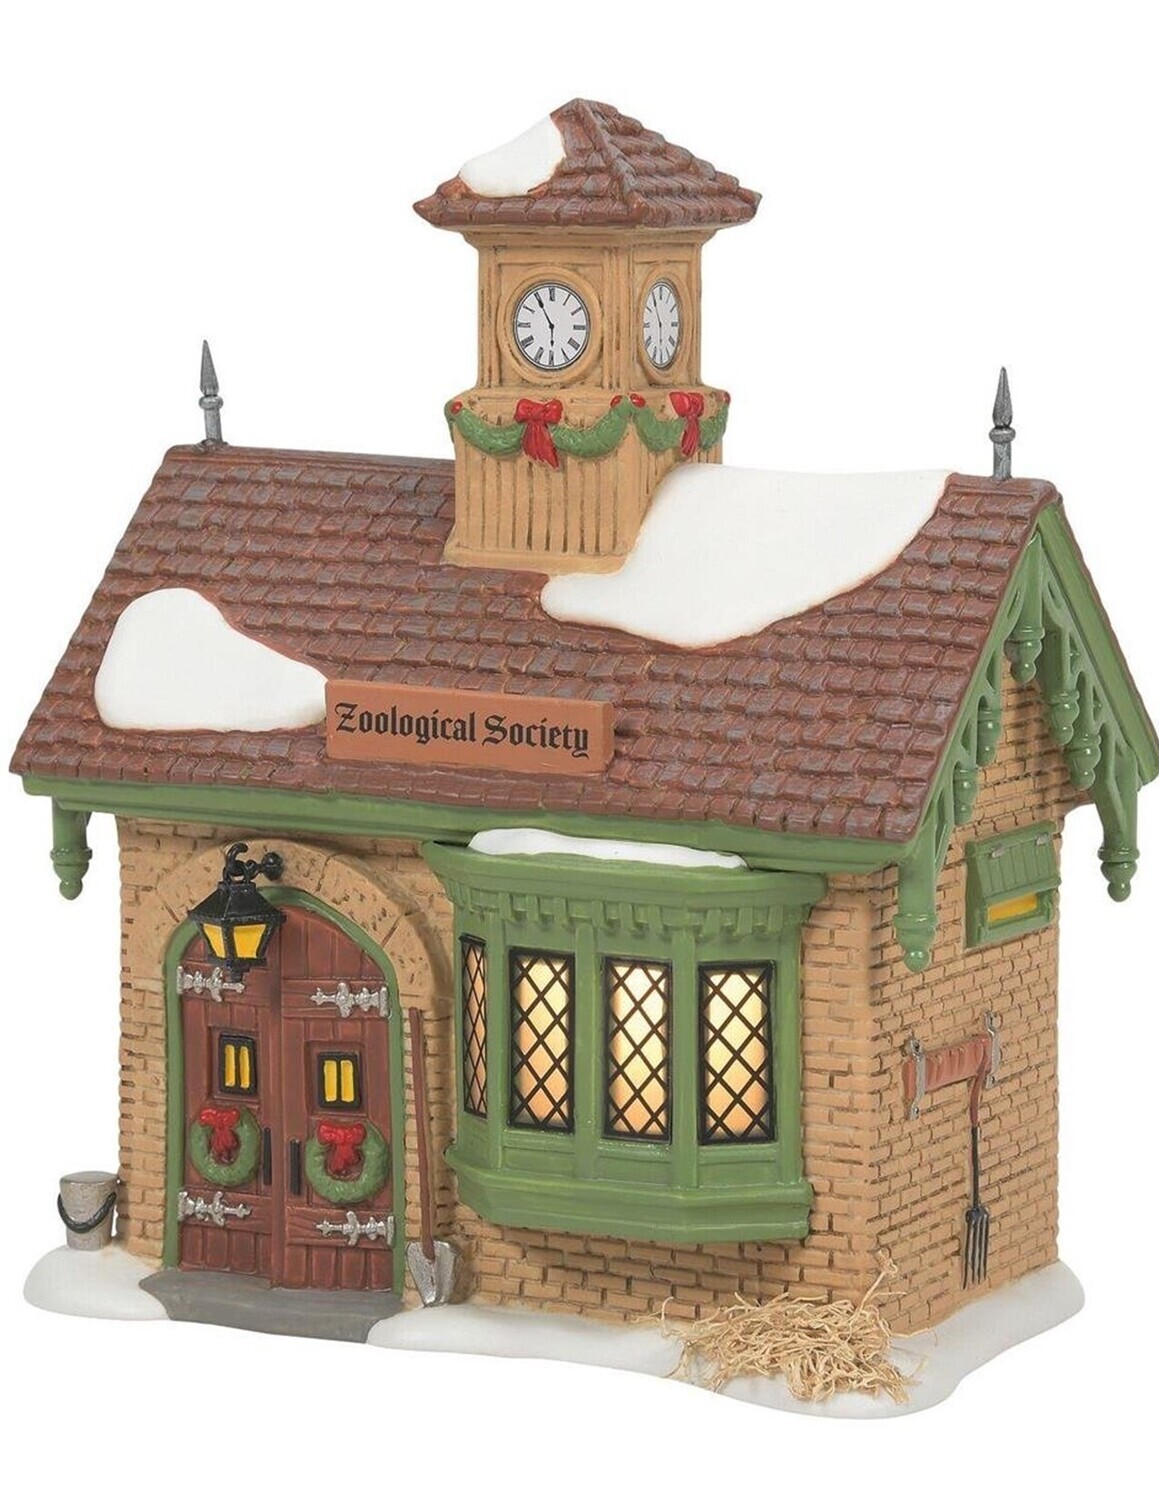 Department 56 Dicken's Village "Zoological Society" Building & Ostrich Figurine (6011394)